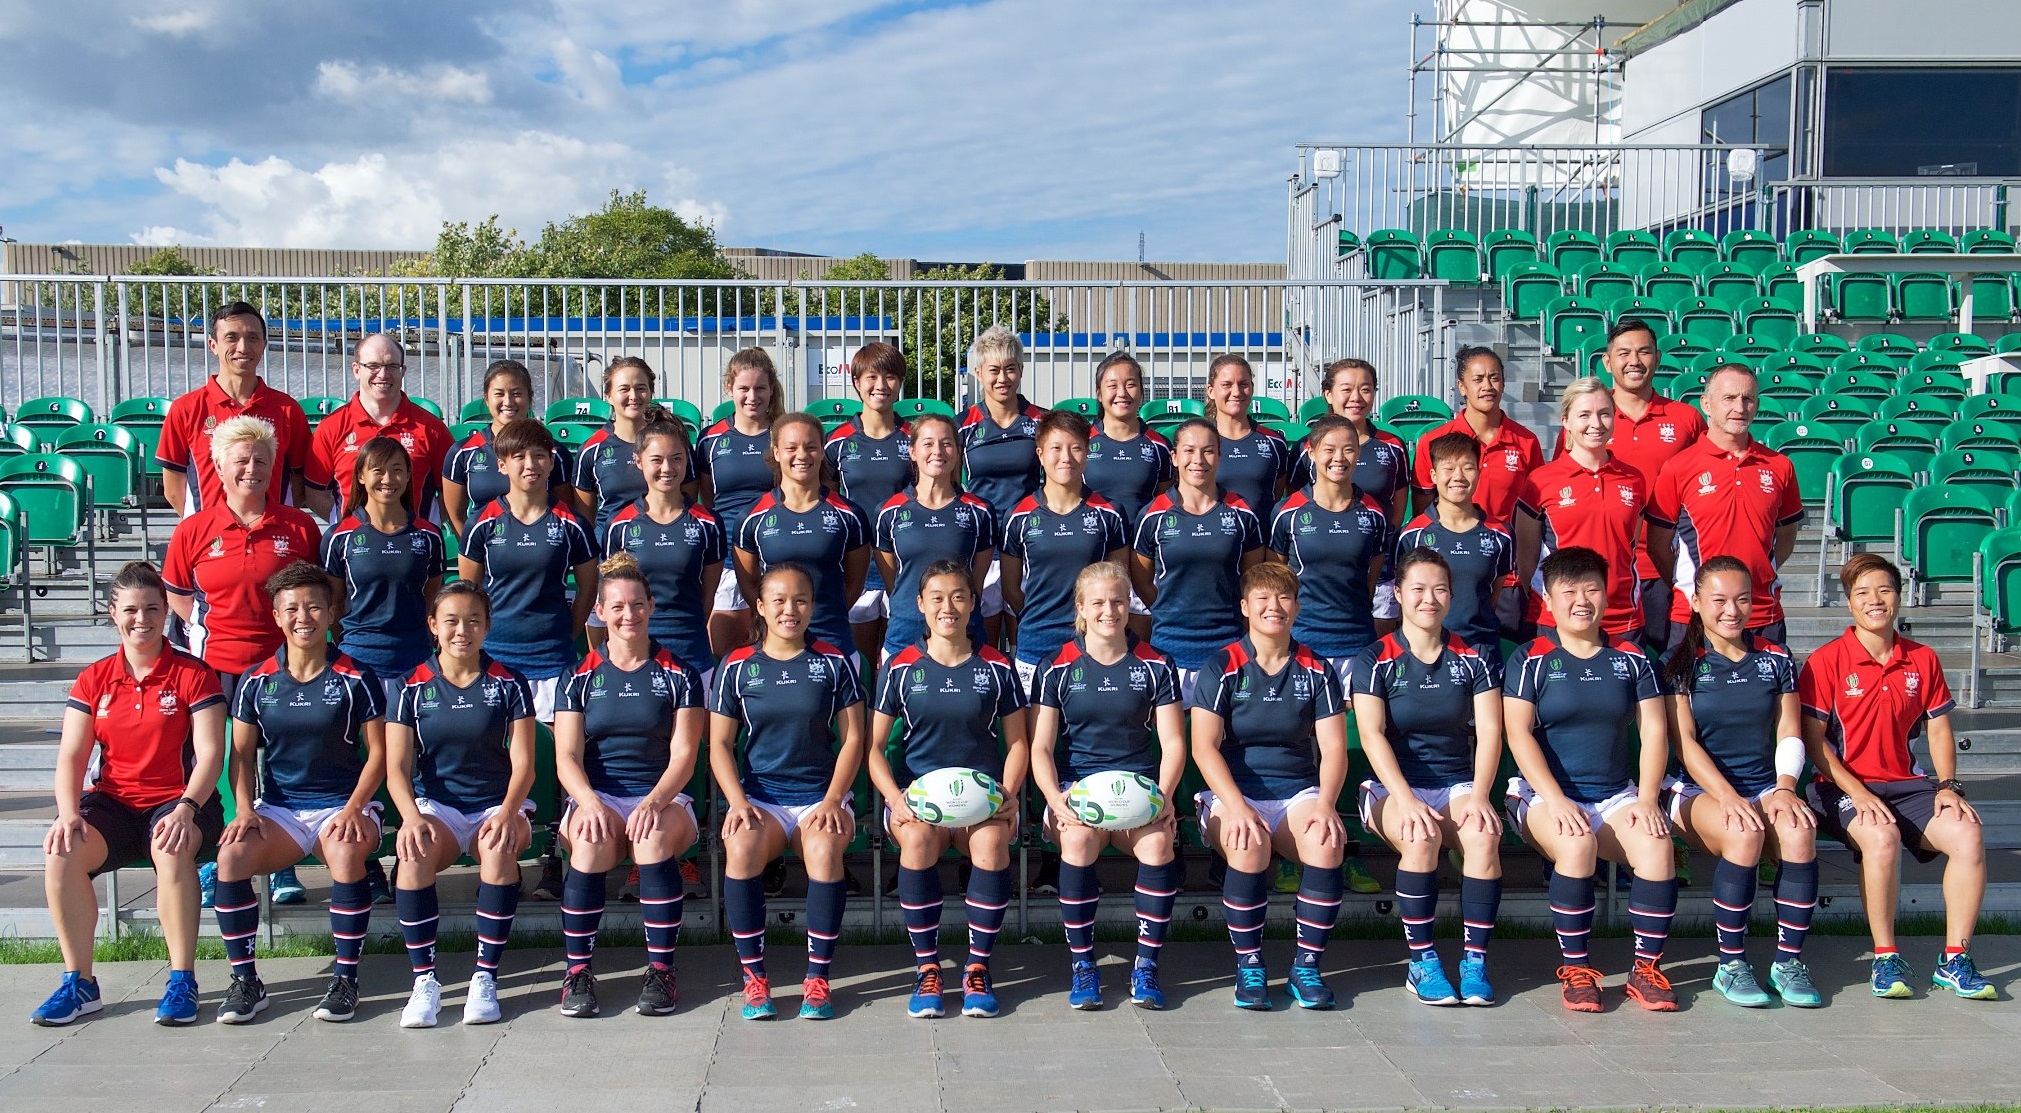 Hong Kong Women’s Rugby World Cup 2017 squad